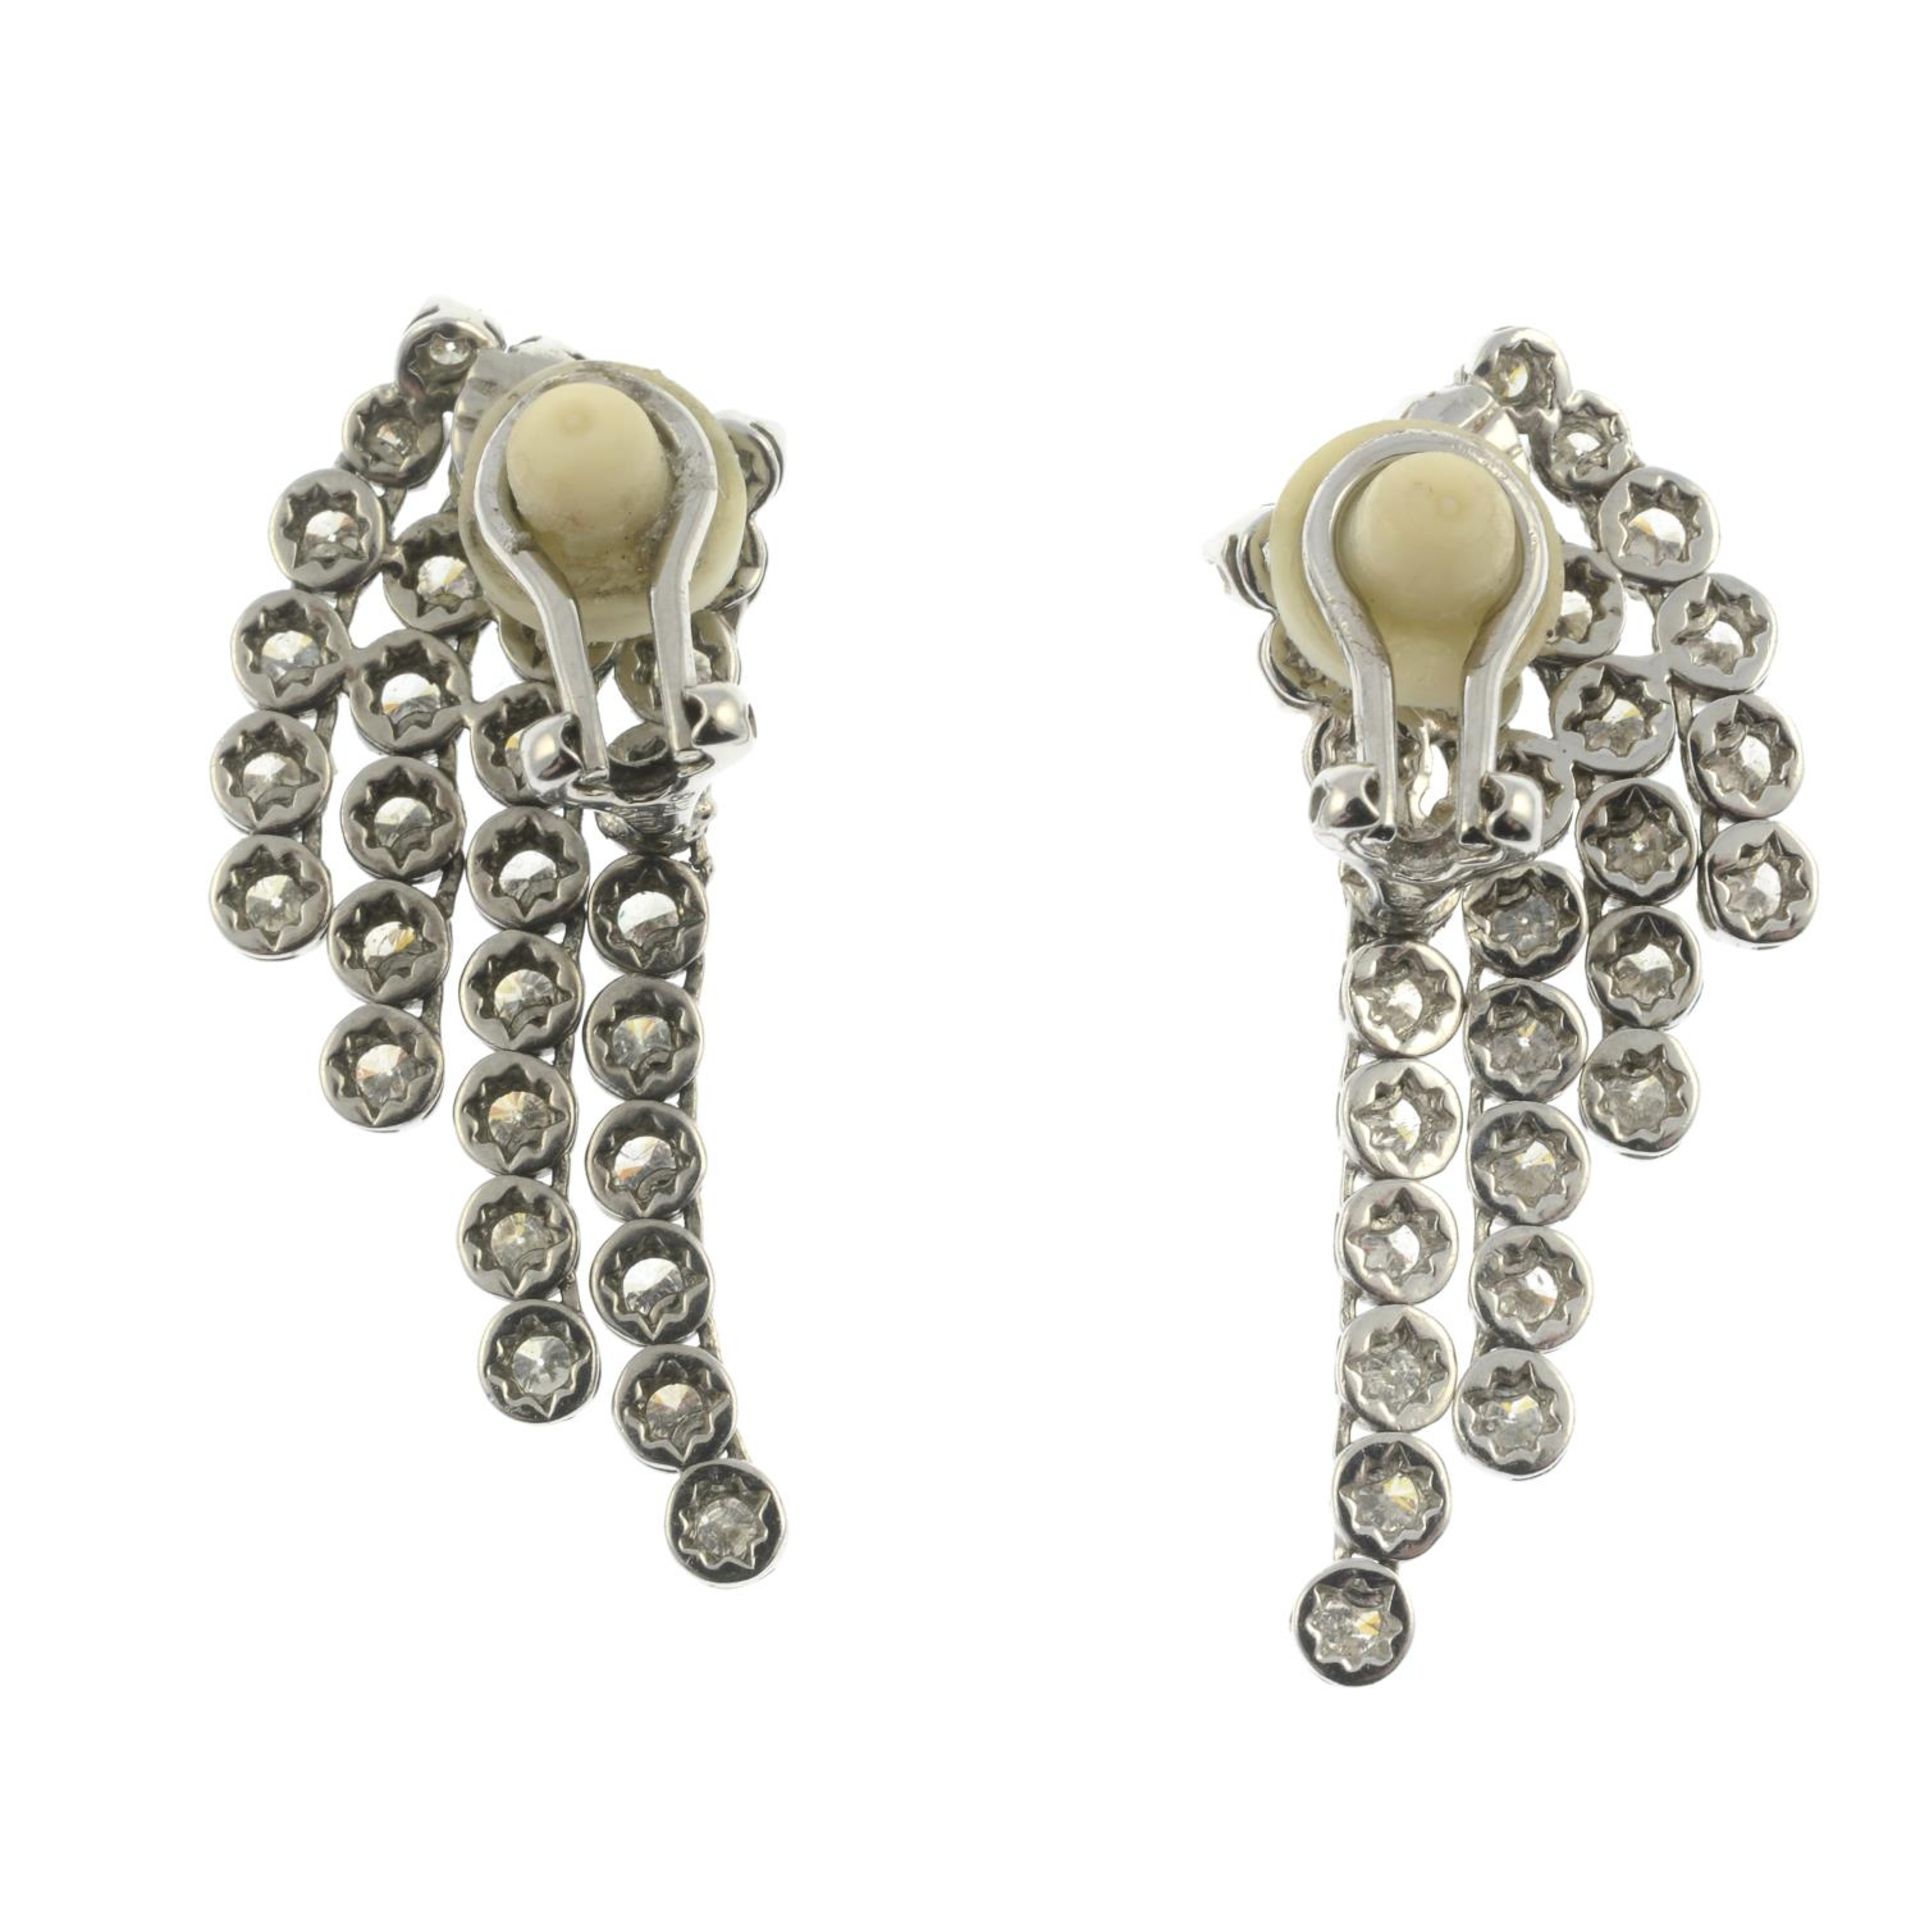 A pair of brilliant-cut diamond earrings.Total diamond weight 3.10cts, - Image 2 of 2